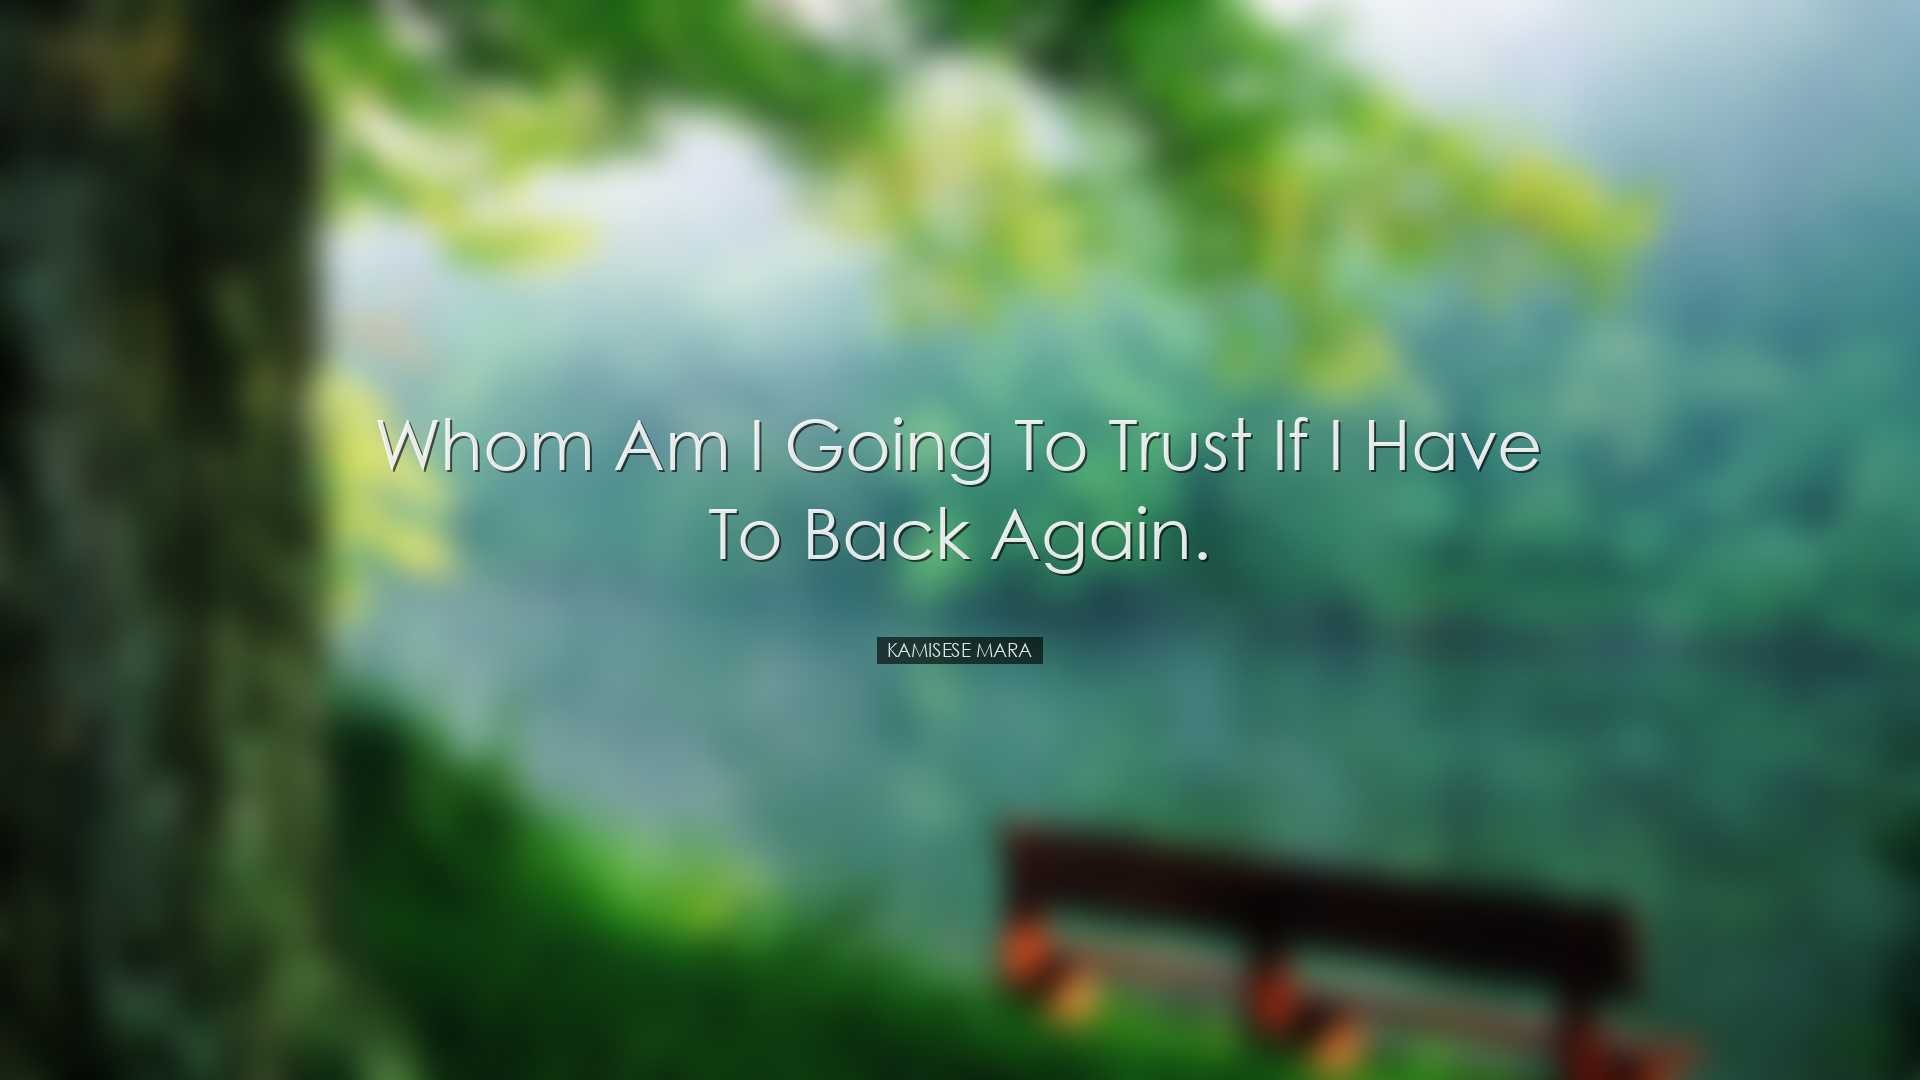 Whom am I going to trust if I have to back again. - Kamisese Mara